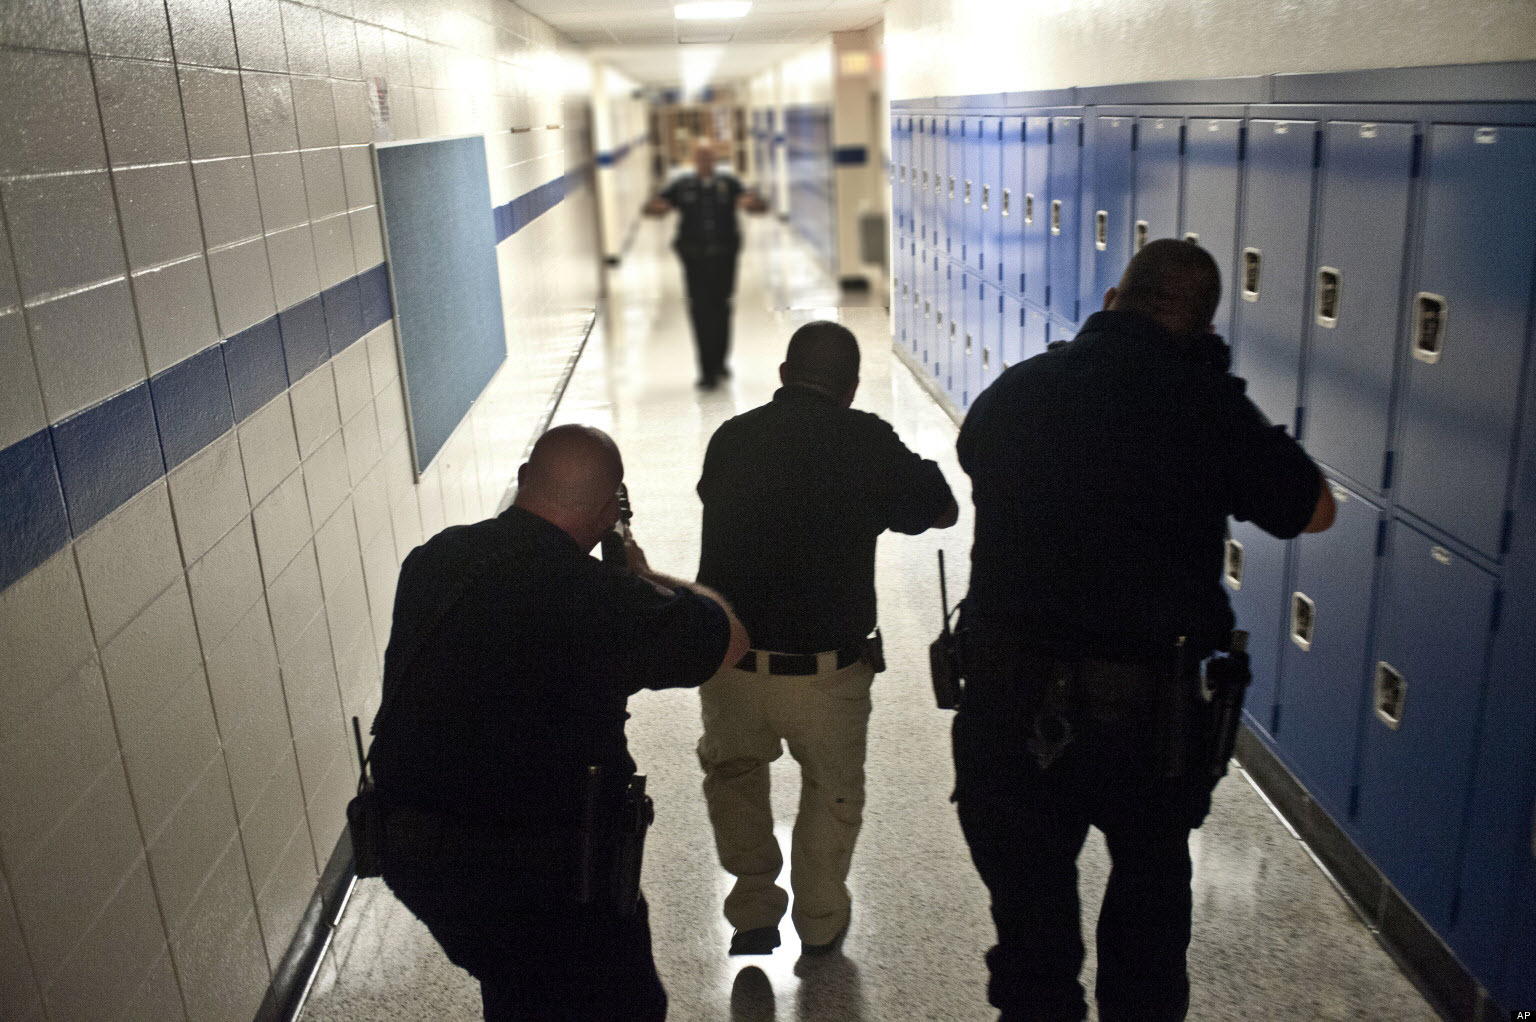 Police train for an active shooter - stock photo